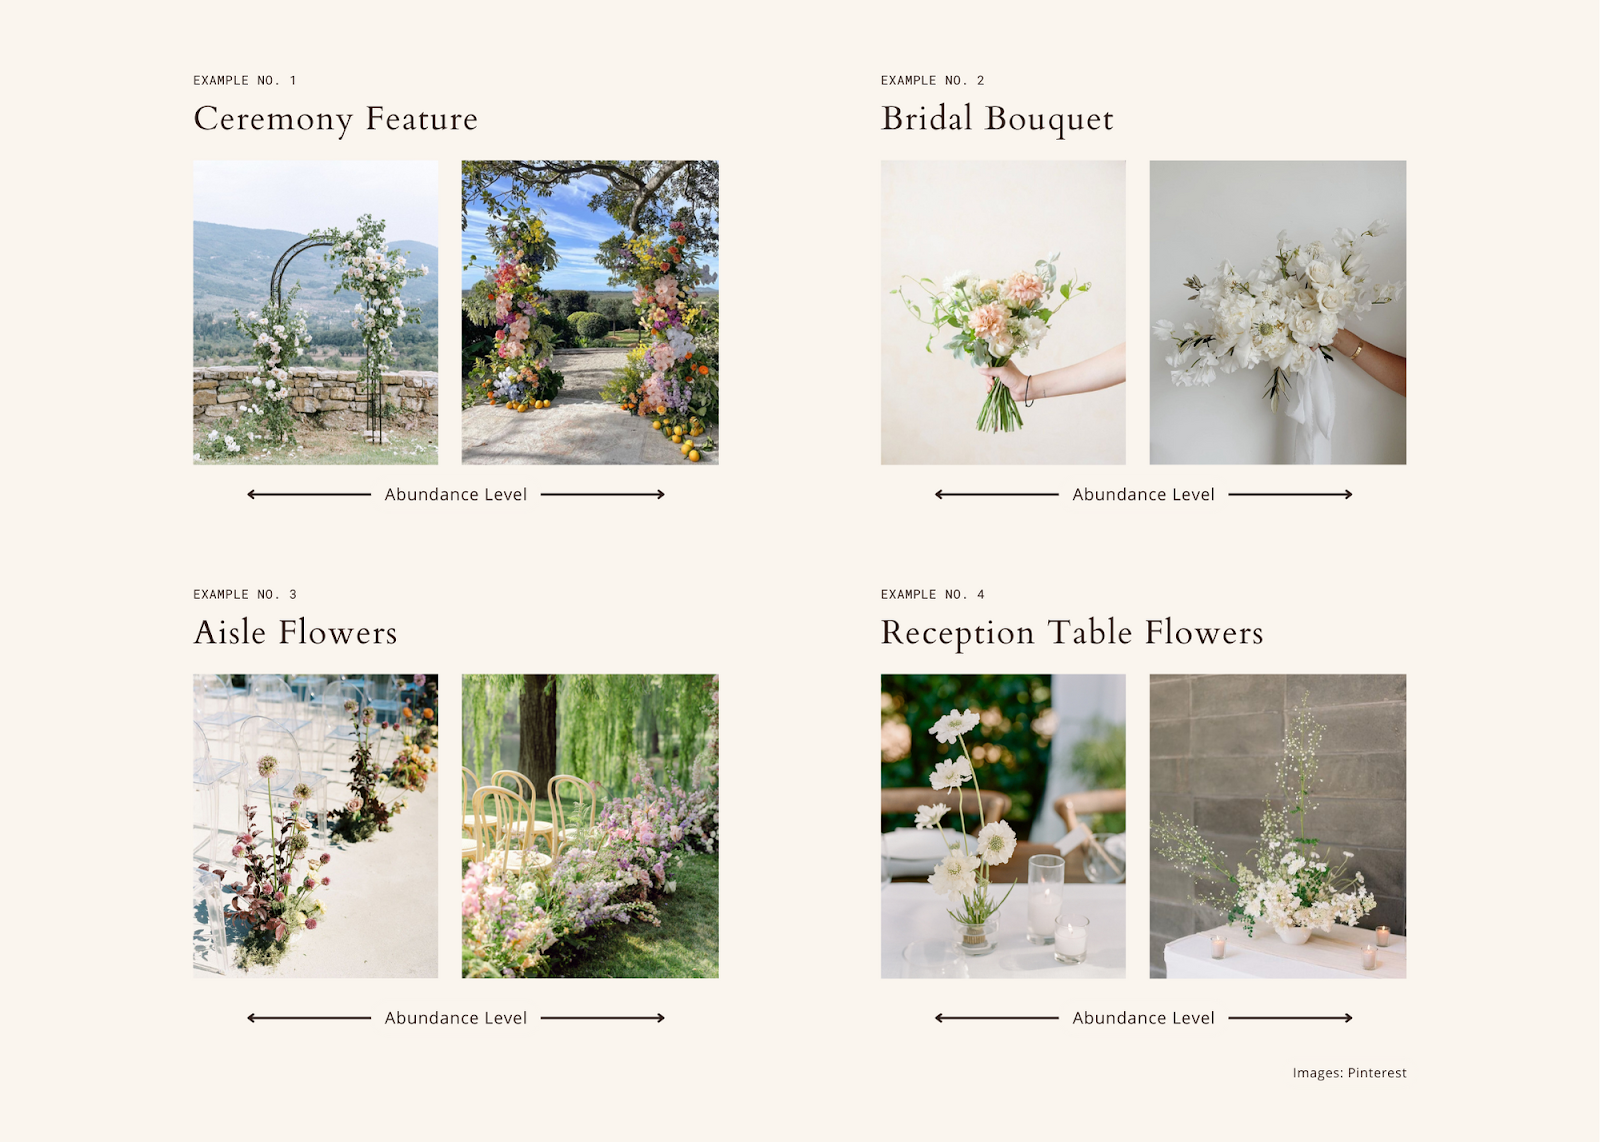 Four examples showing low floral abundance versus high floral abundance. This is to help show what influences how much wedding flowers cost.